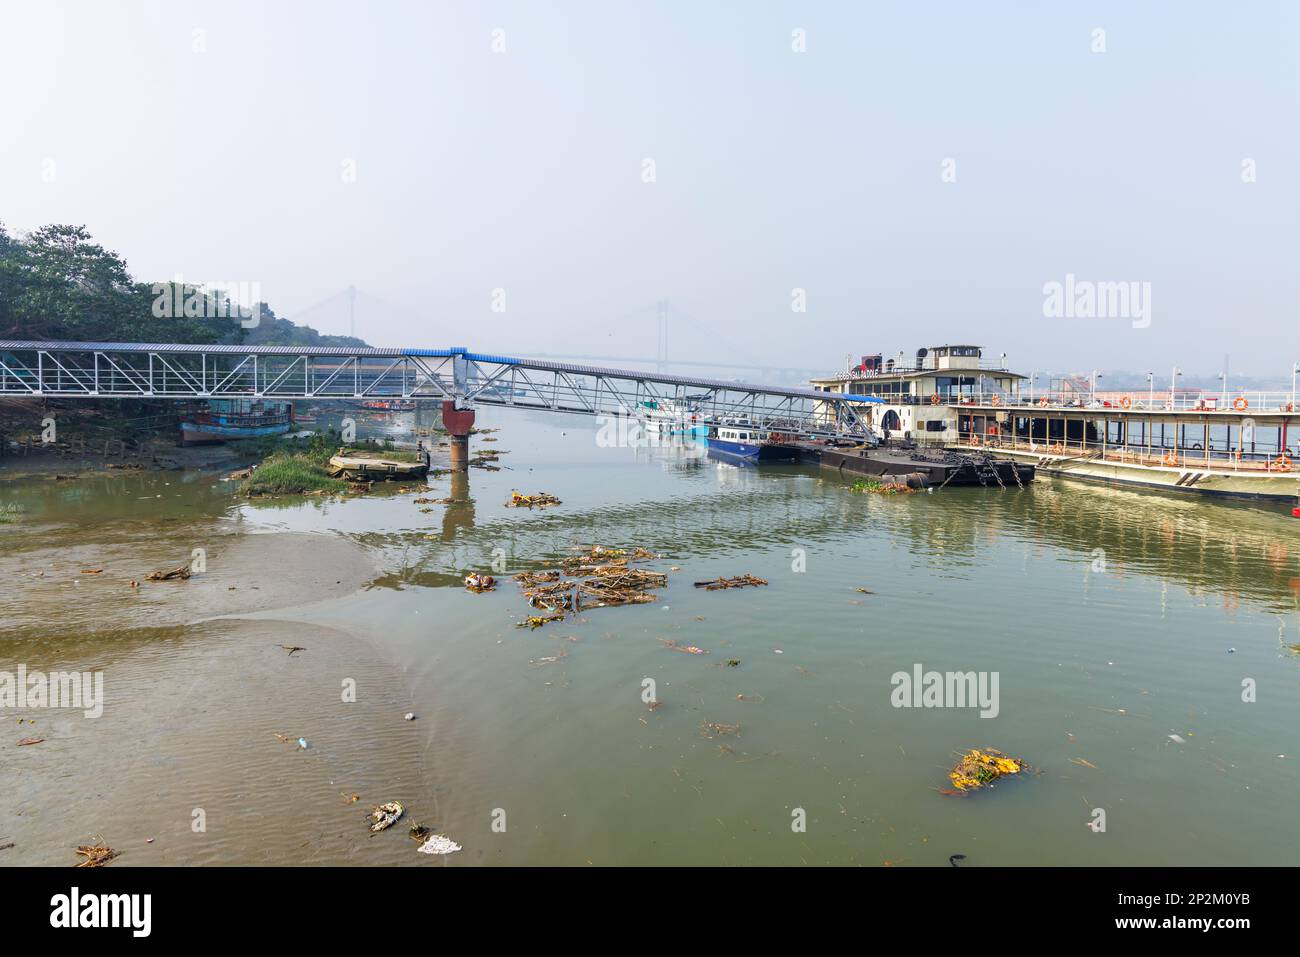 Rubbish and discarded effigies of the goddess Kali on the riverbank, River Police Jetty on the Hooghly River at Kolkata (Calcutta), West Bengal, India Stock Photo